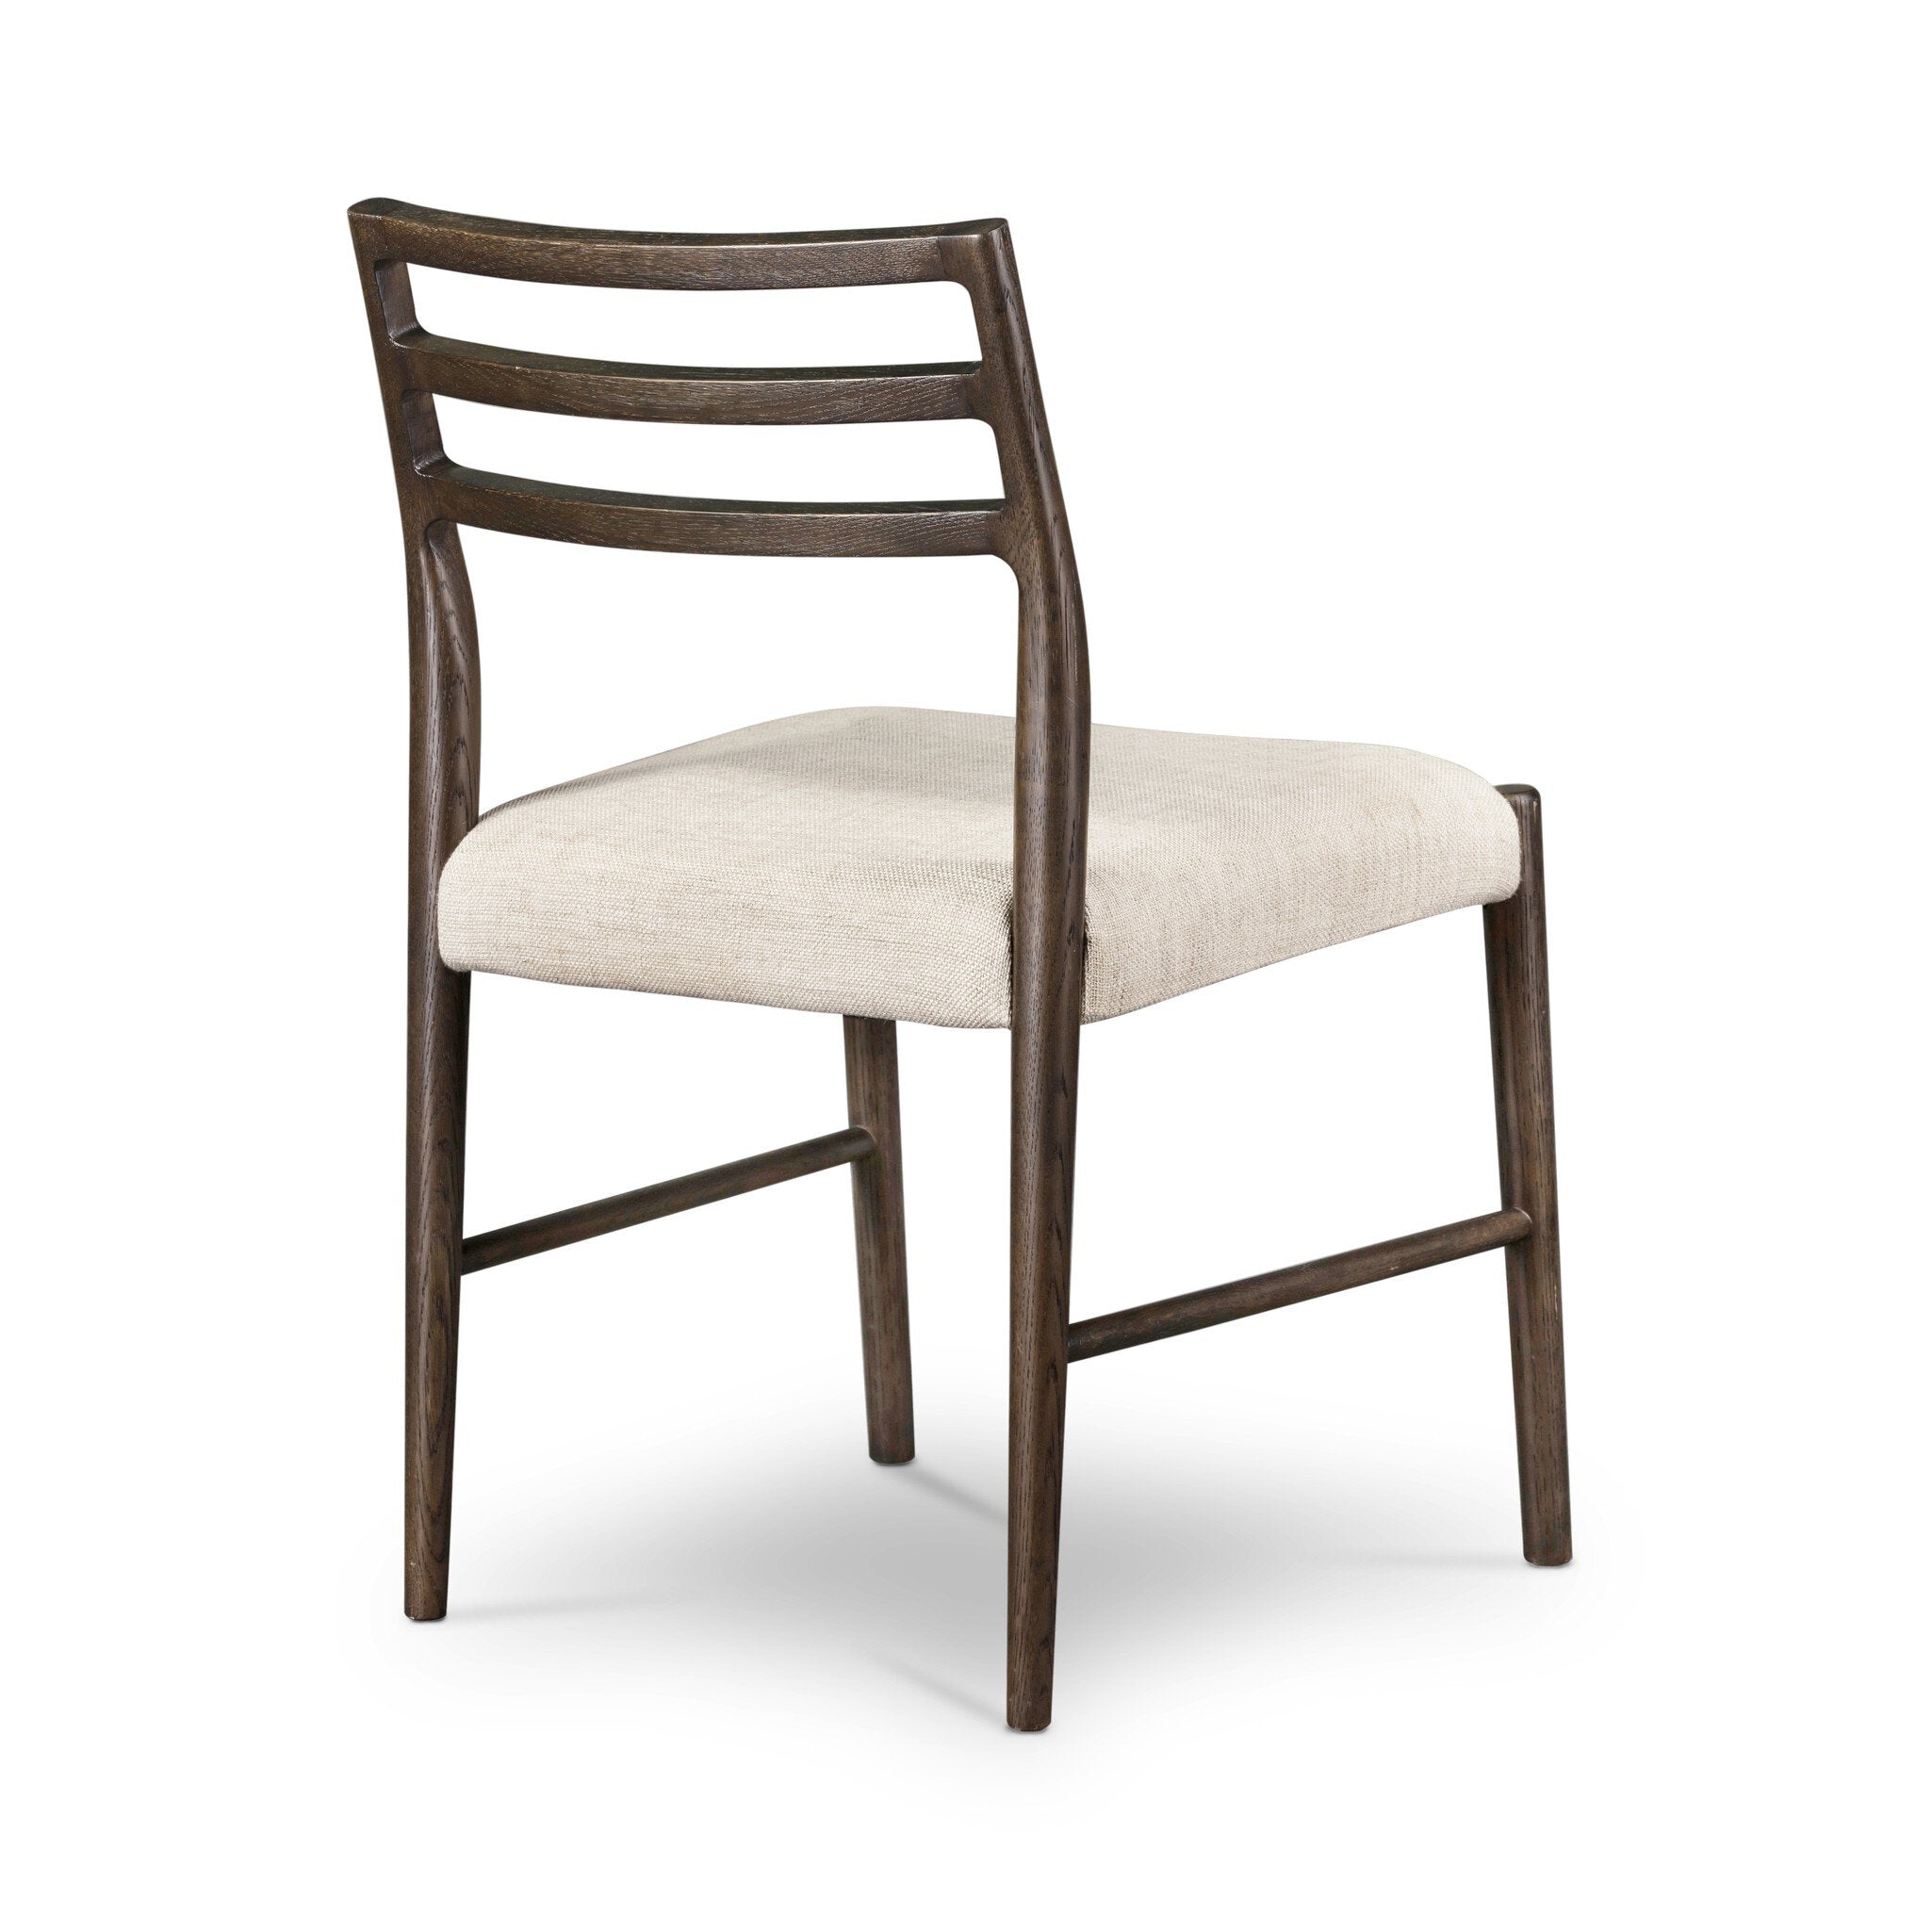 Glenmore Dining Chair - Essence Natural